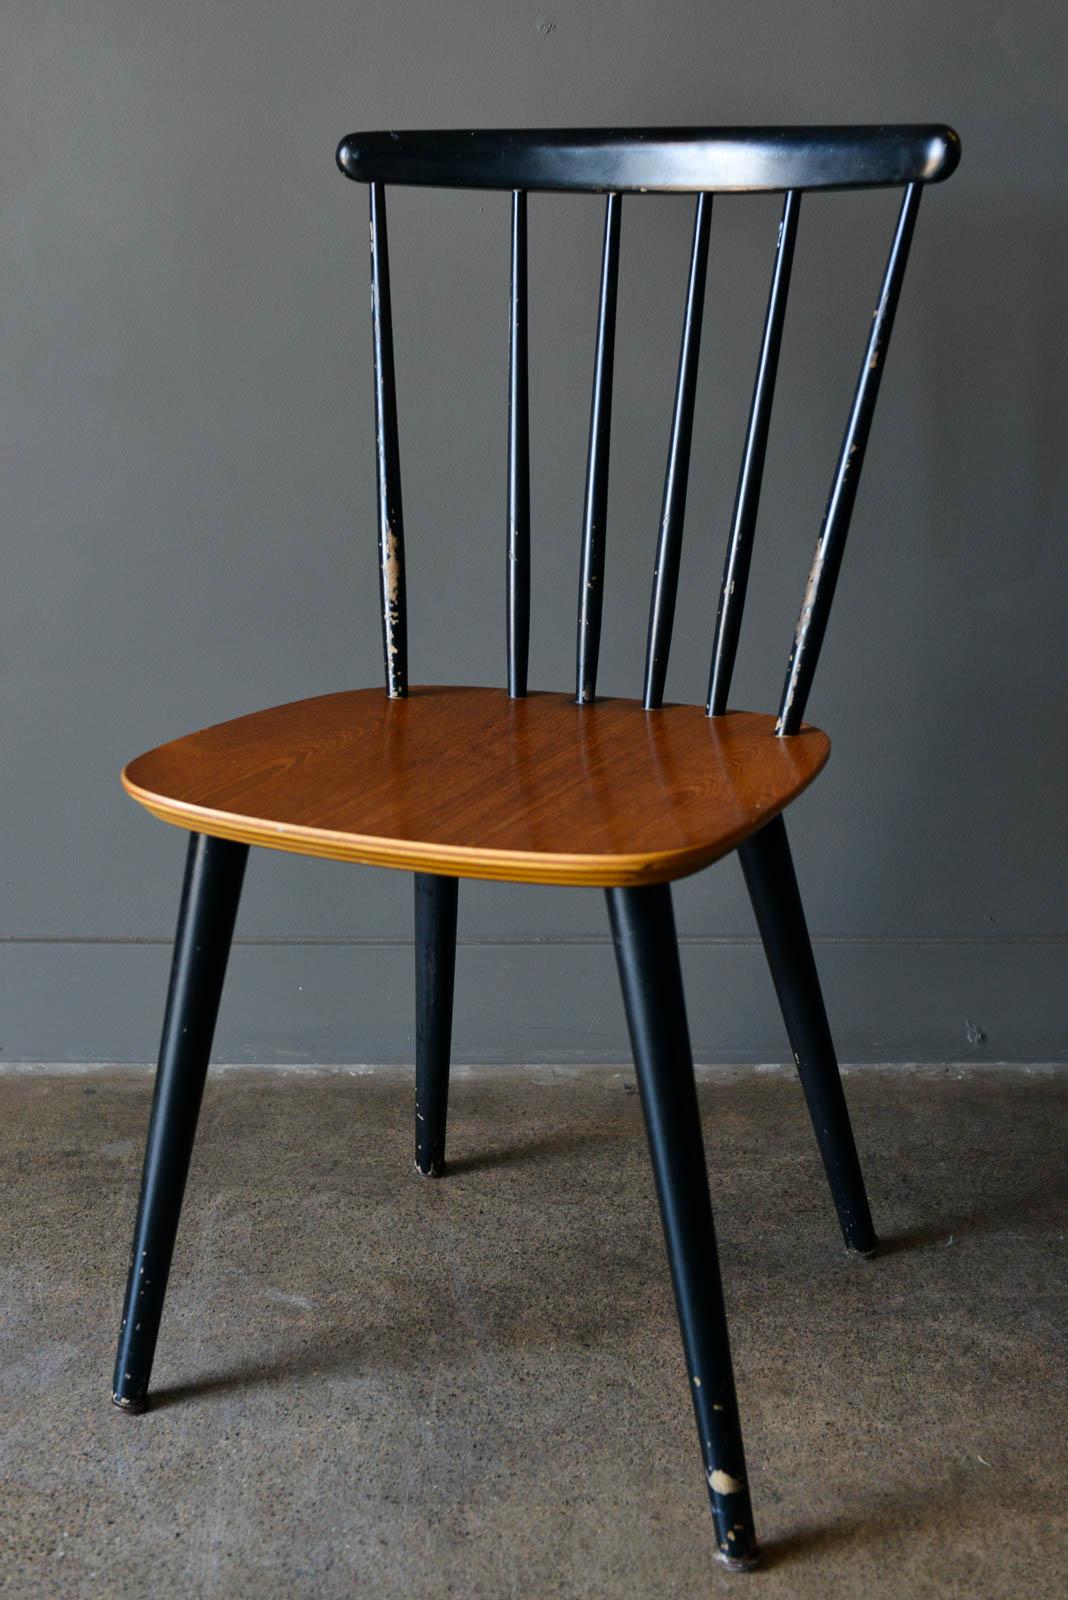 Danish spindle back chair by Thomas Harlev for Farstrup, 1960. Single dining chair with age appropriate wear but in good condition. Two tone black frame and legs with teak seat. 

Measures 18